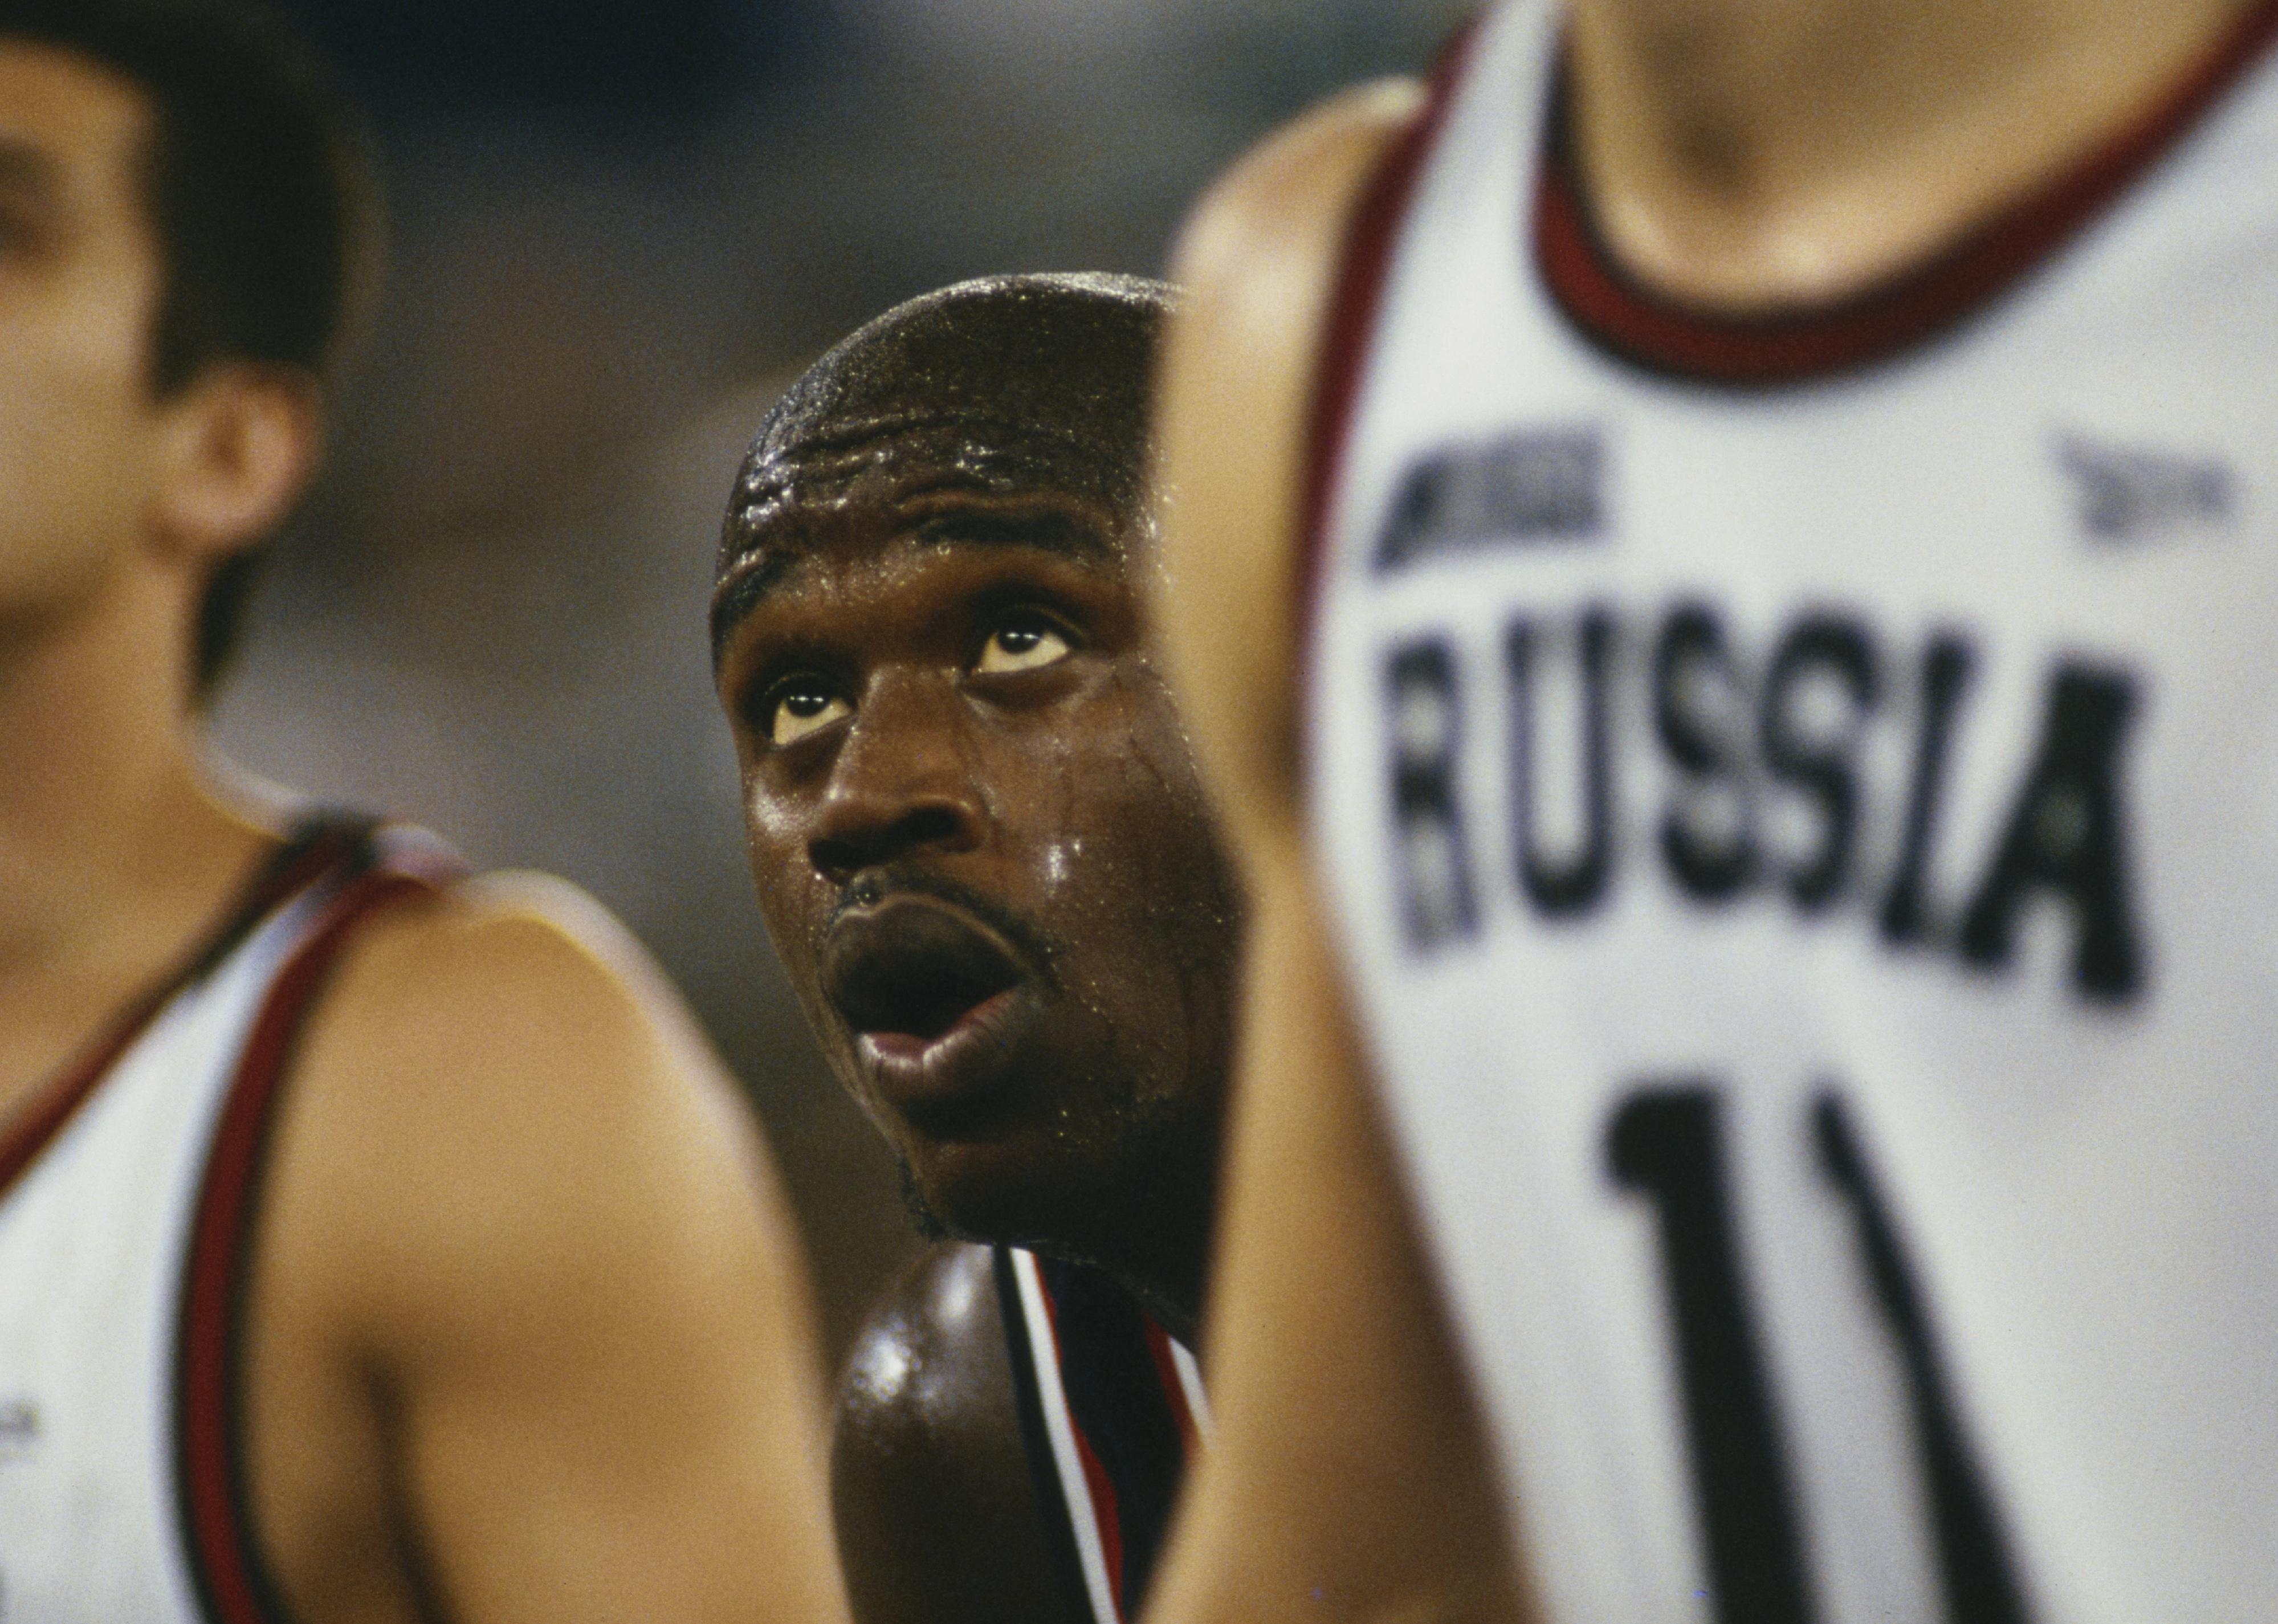 Shaquille O'Neal, framed by two Russian players, during the final of the 1994 FIBA World Championship.